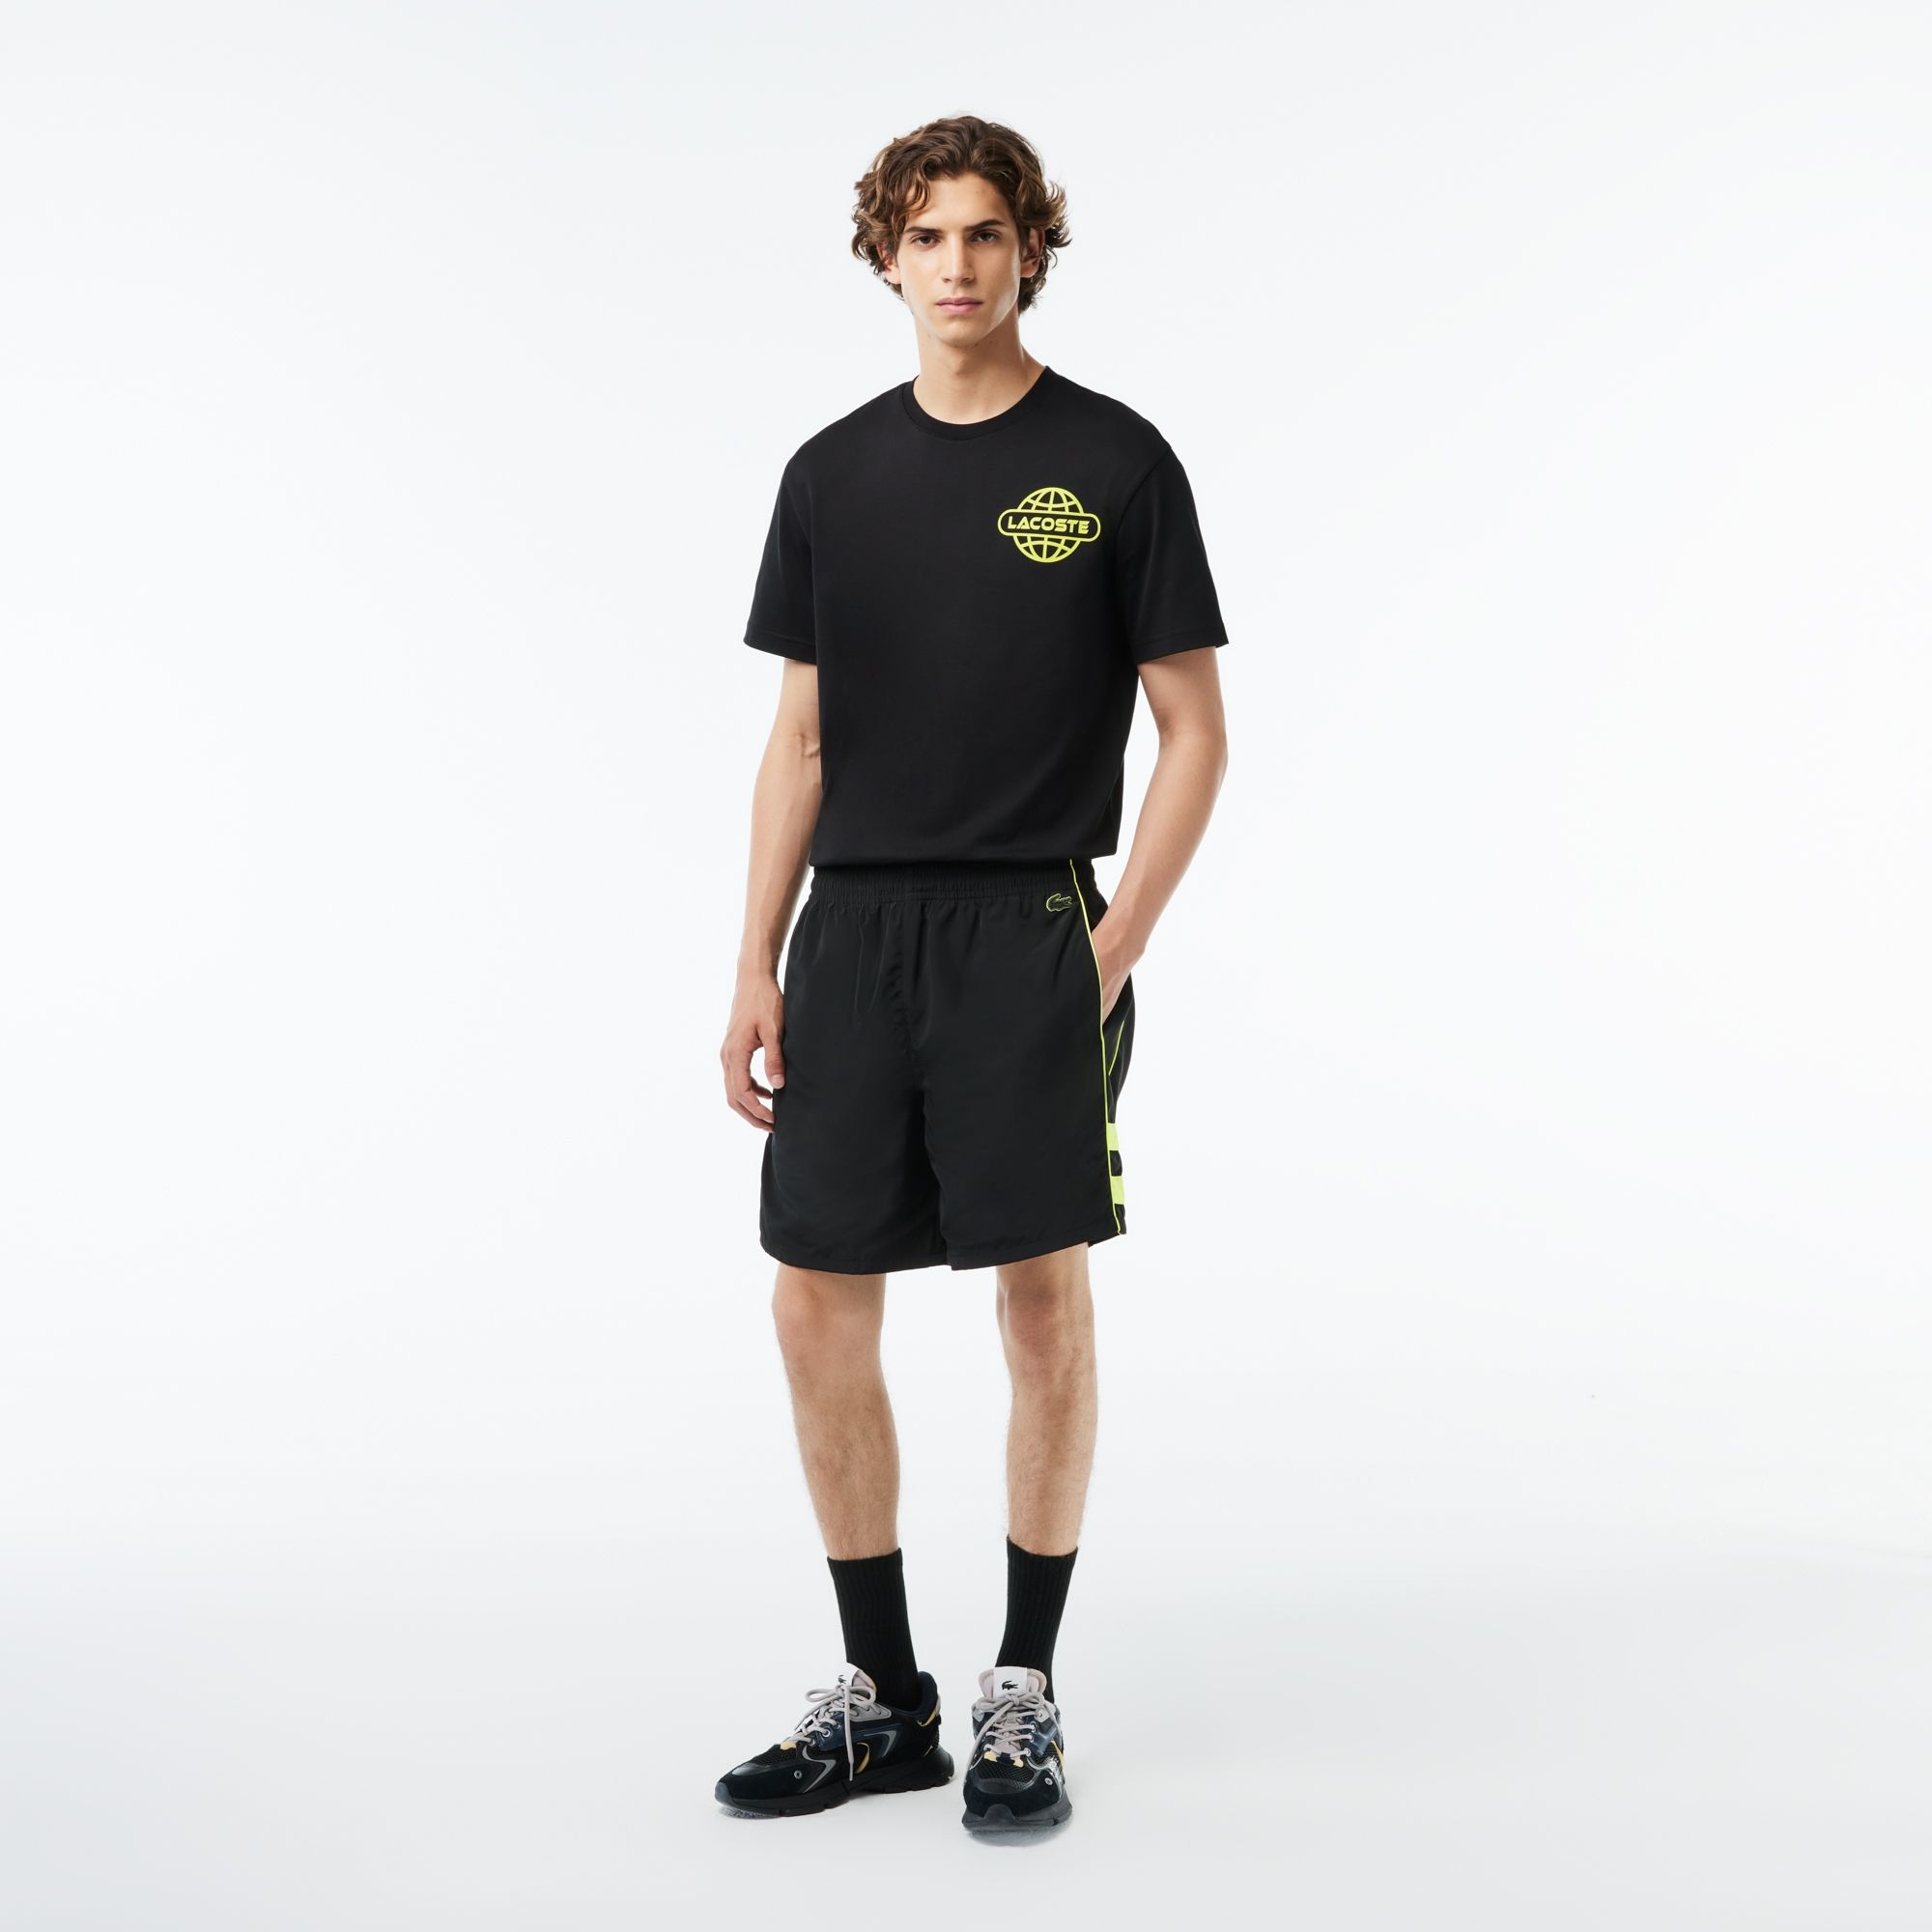  Lacoste Relaxed Fit Recycled Fiber Embroidered Shorts - Black 